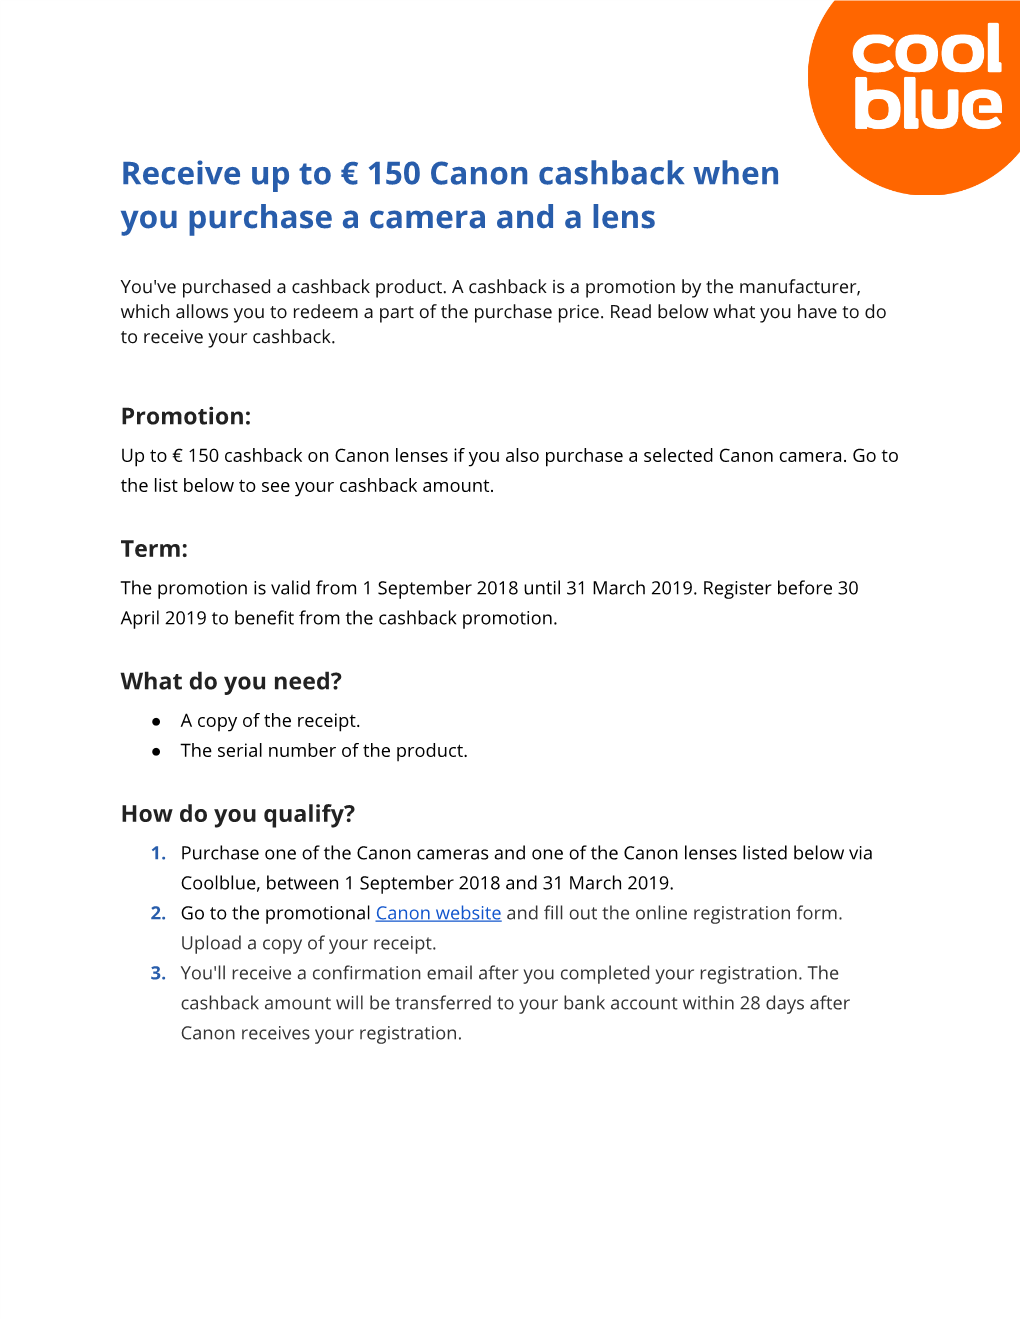 Receive up to € 150 Canon Cashback When You Purchase a Camera and a Lens